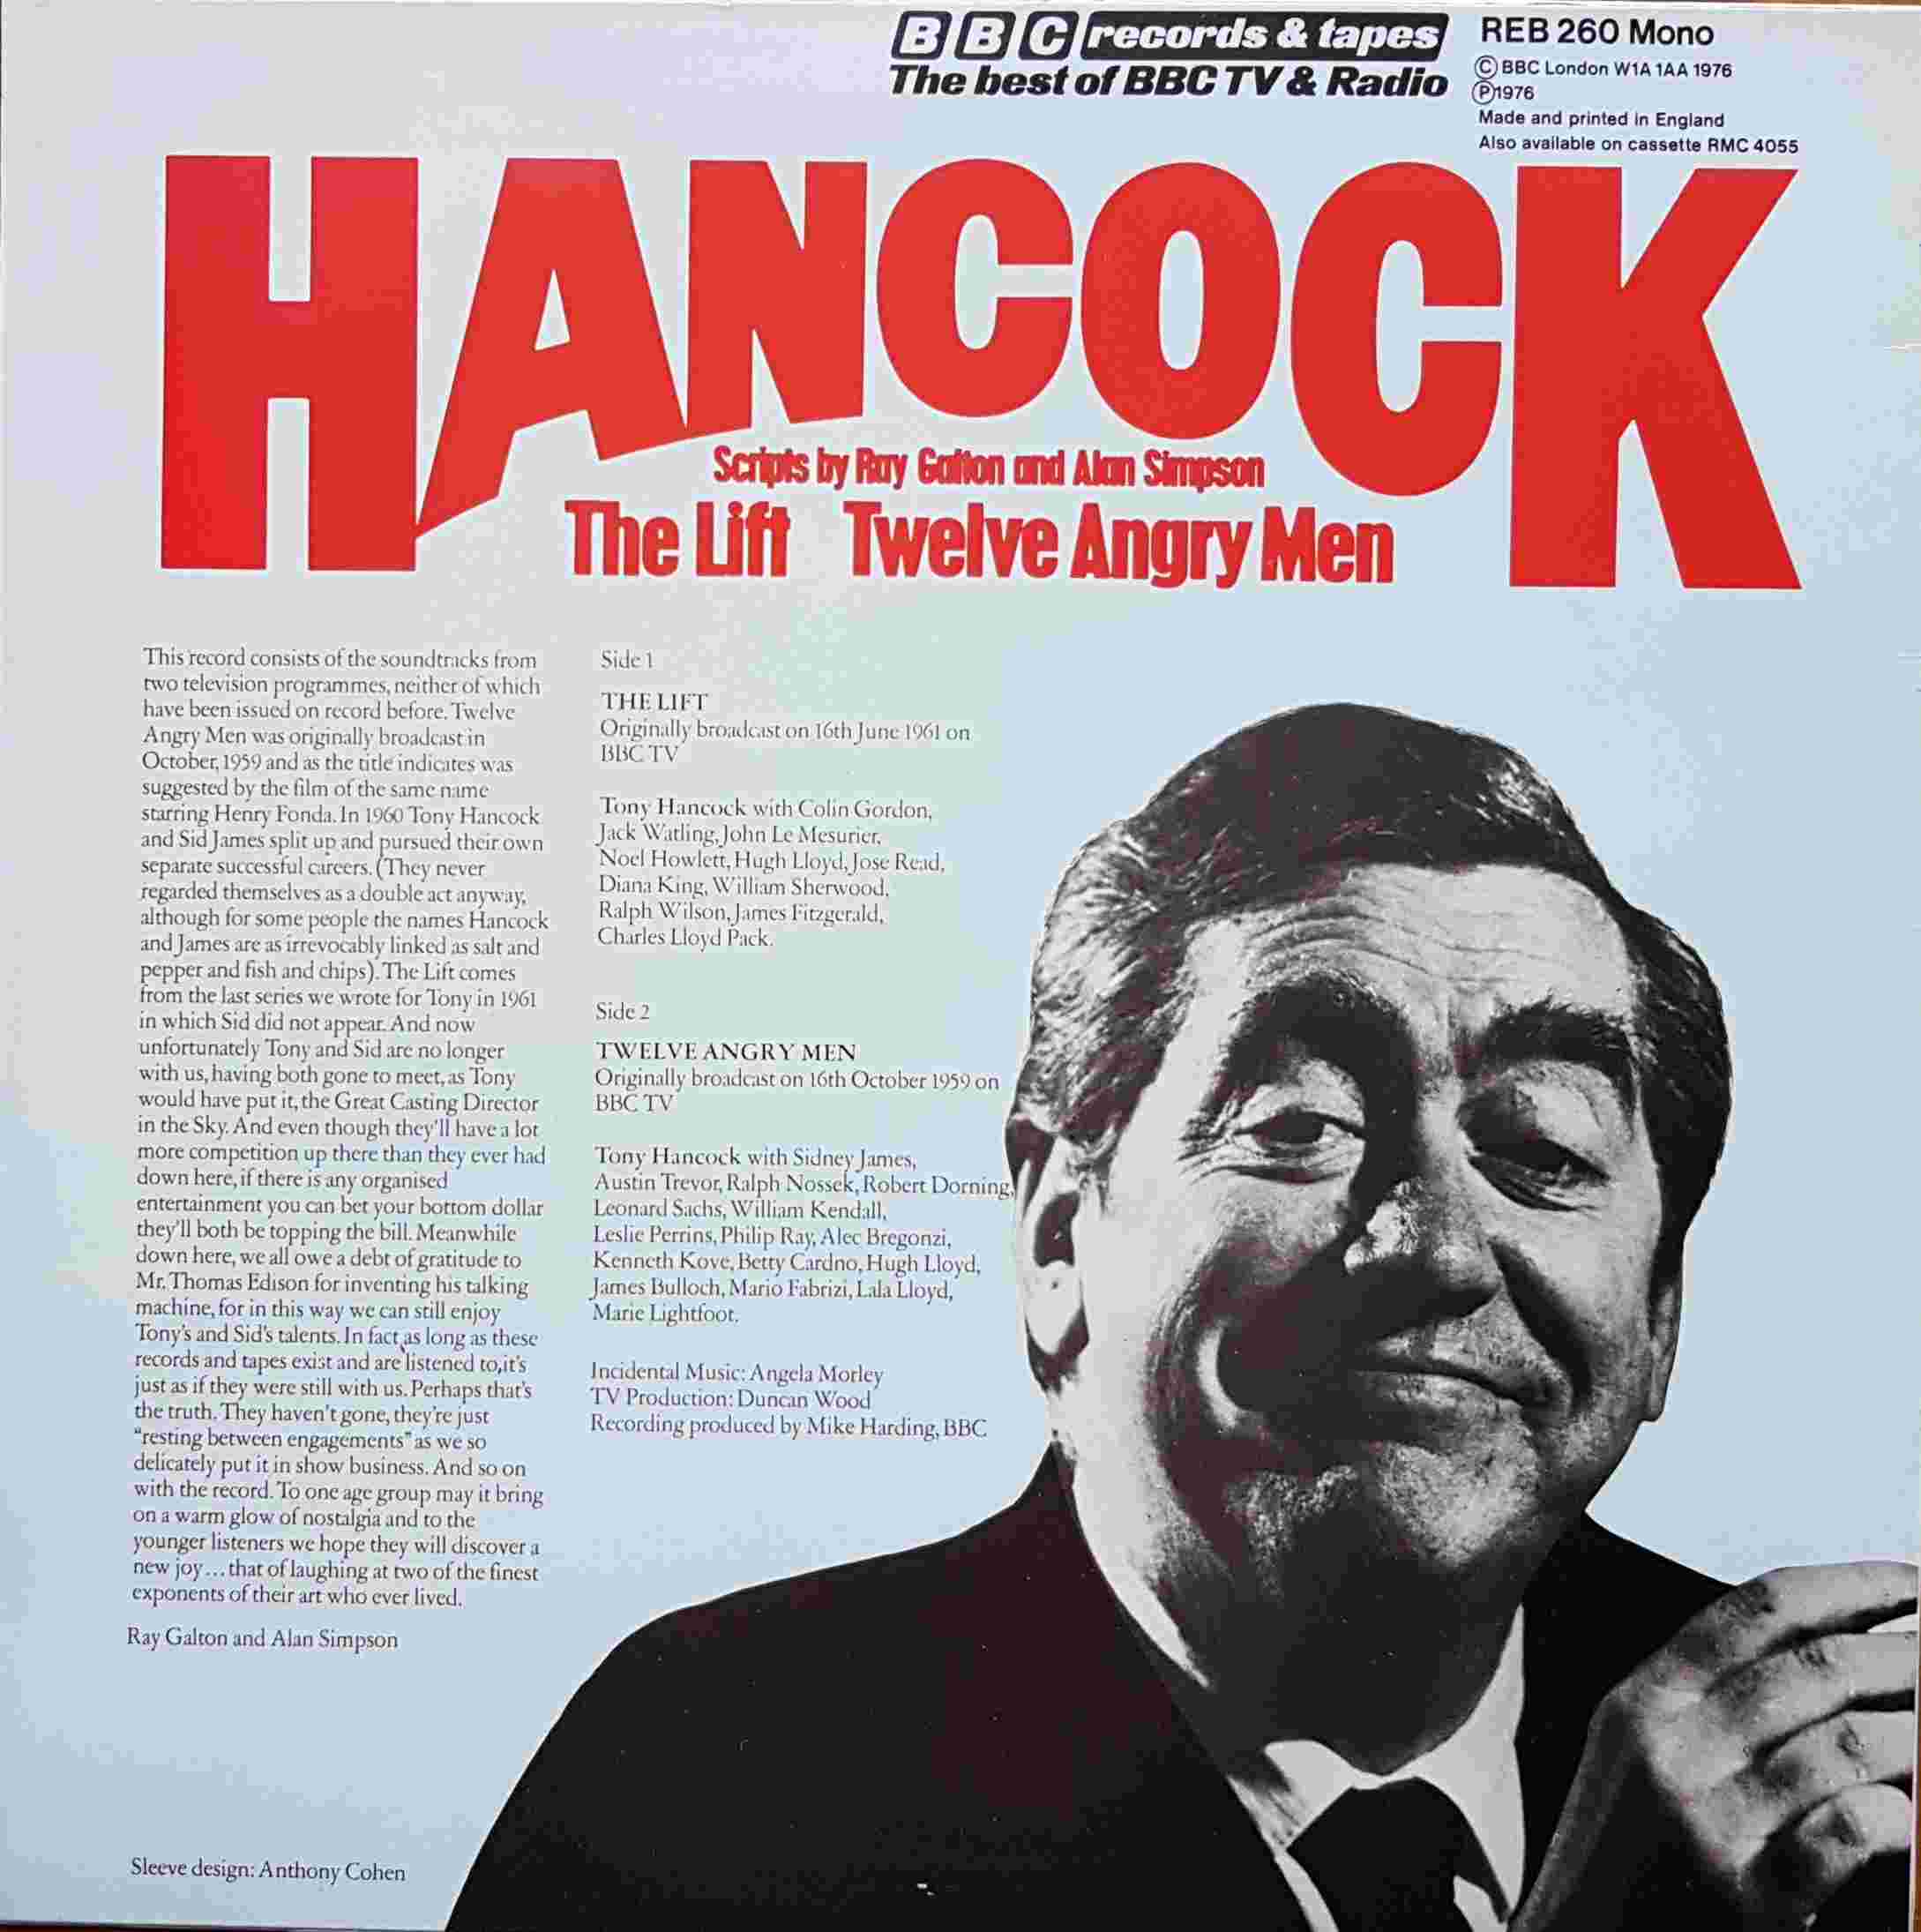 Picture of REB 260 Hancock by artist Tony Hancock from the BBC records and Tapes library